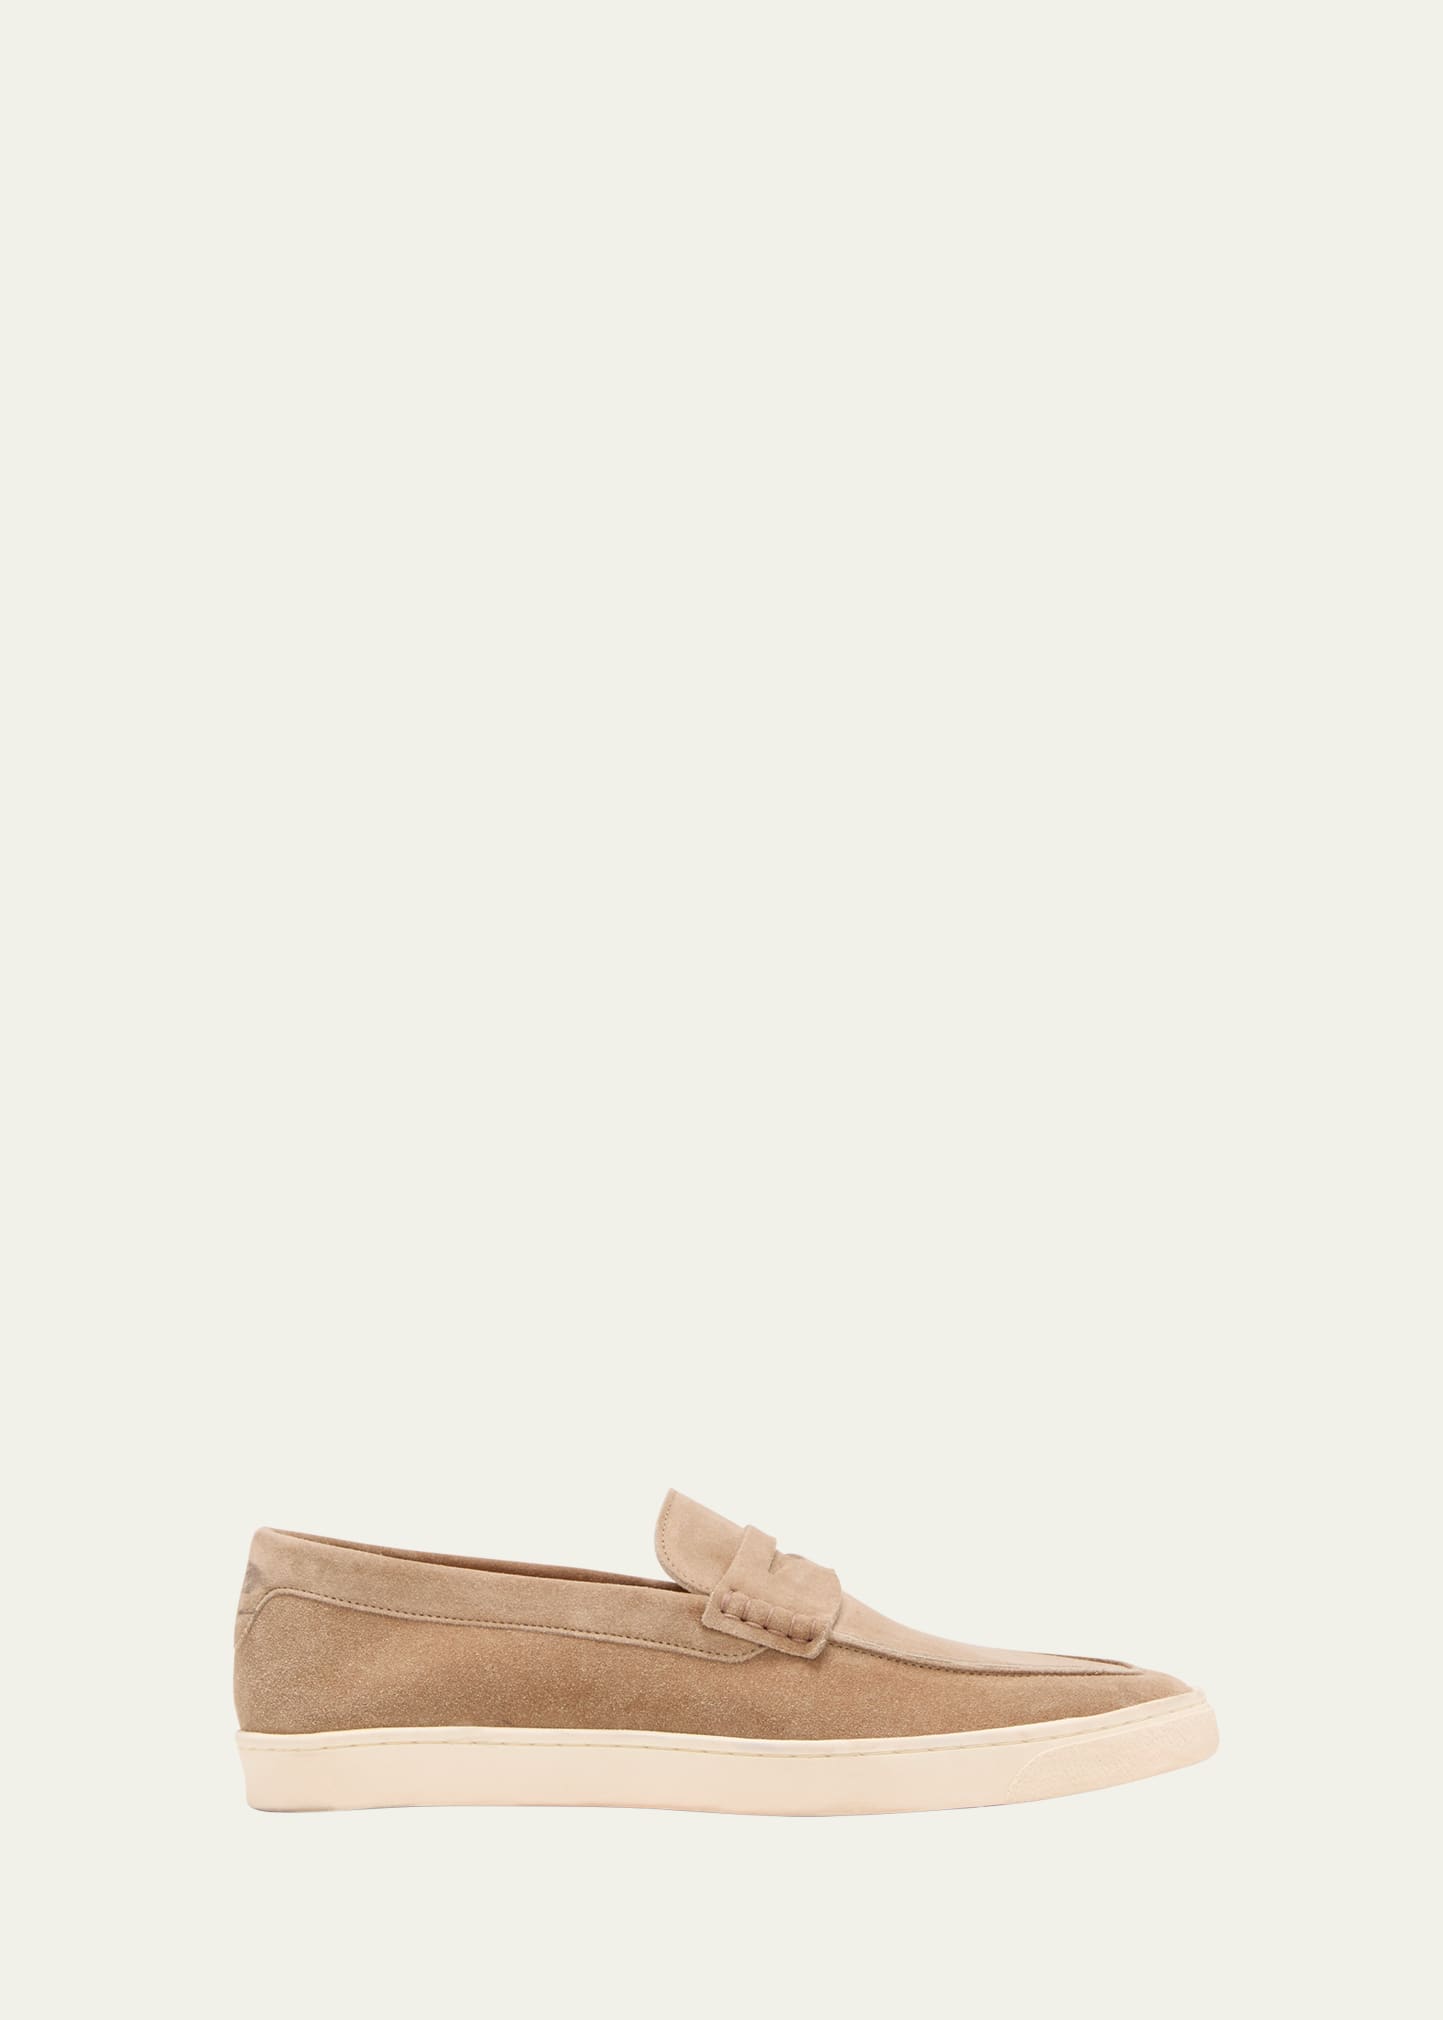 Men's Suede Moccasin Penny Loafers